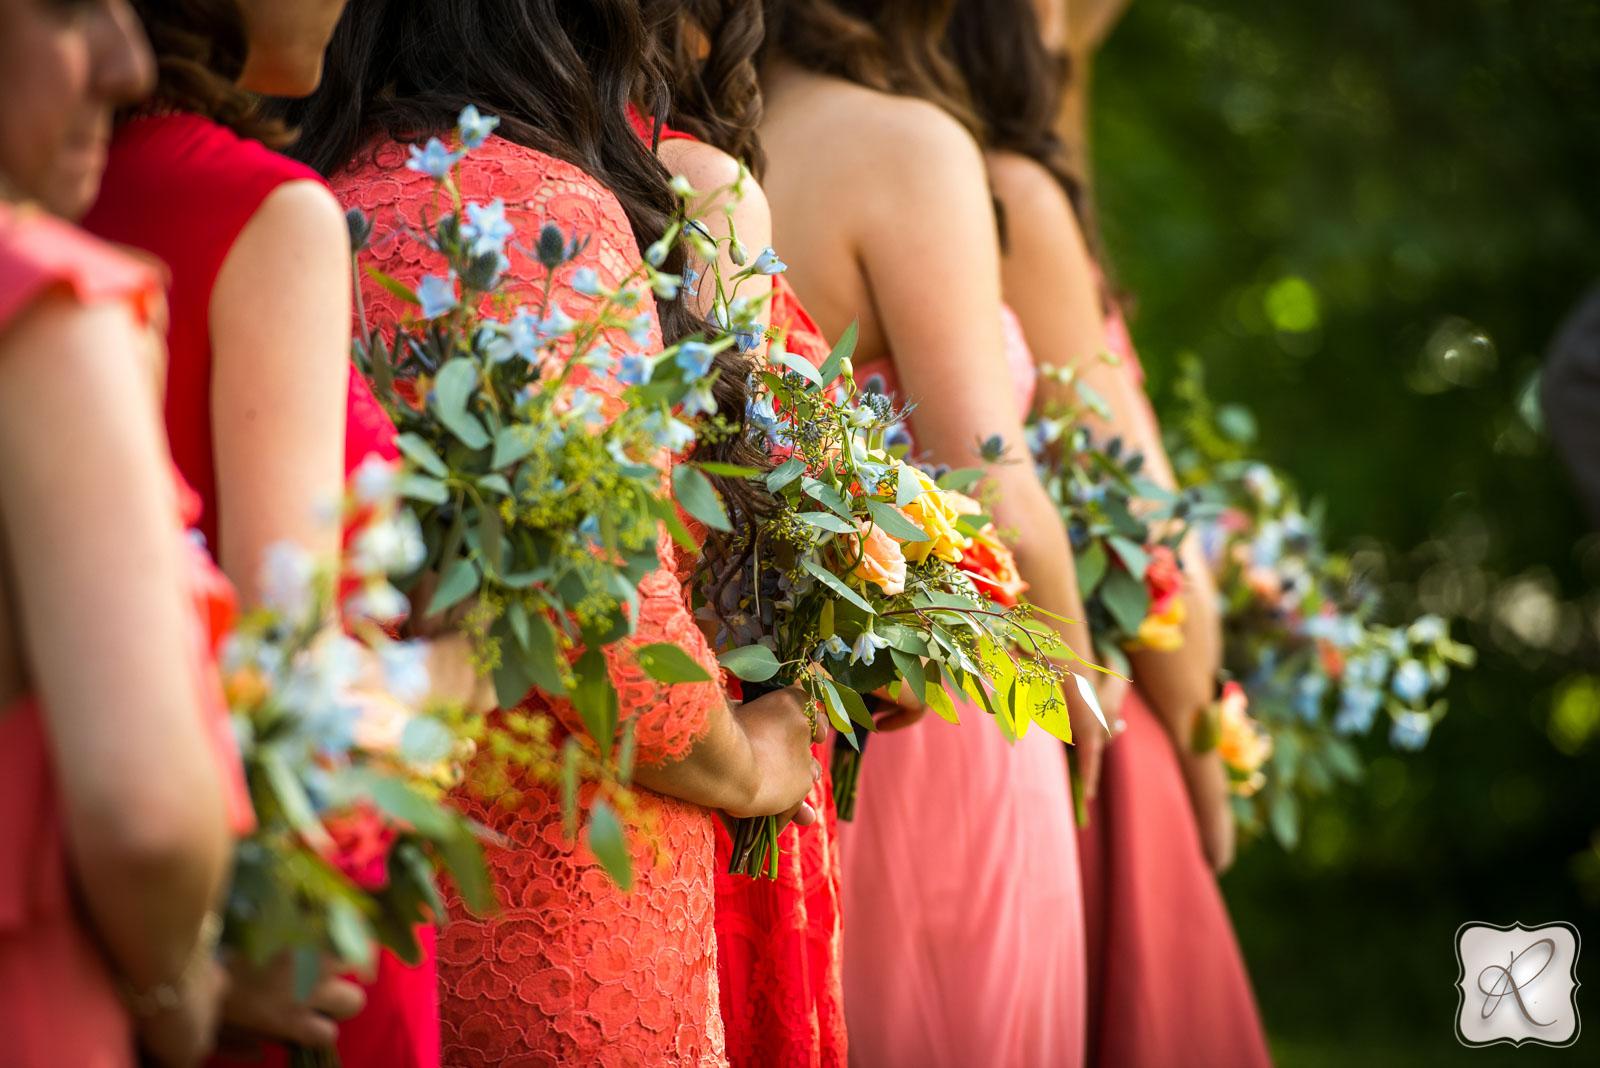 April's Garden Wedding Flowers by Allison Ragsdale Photography